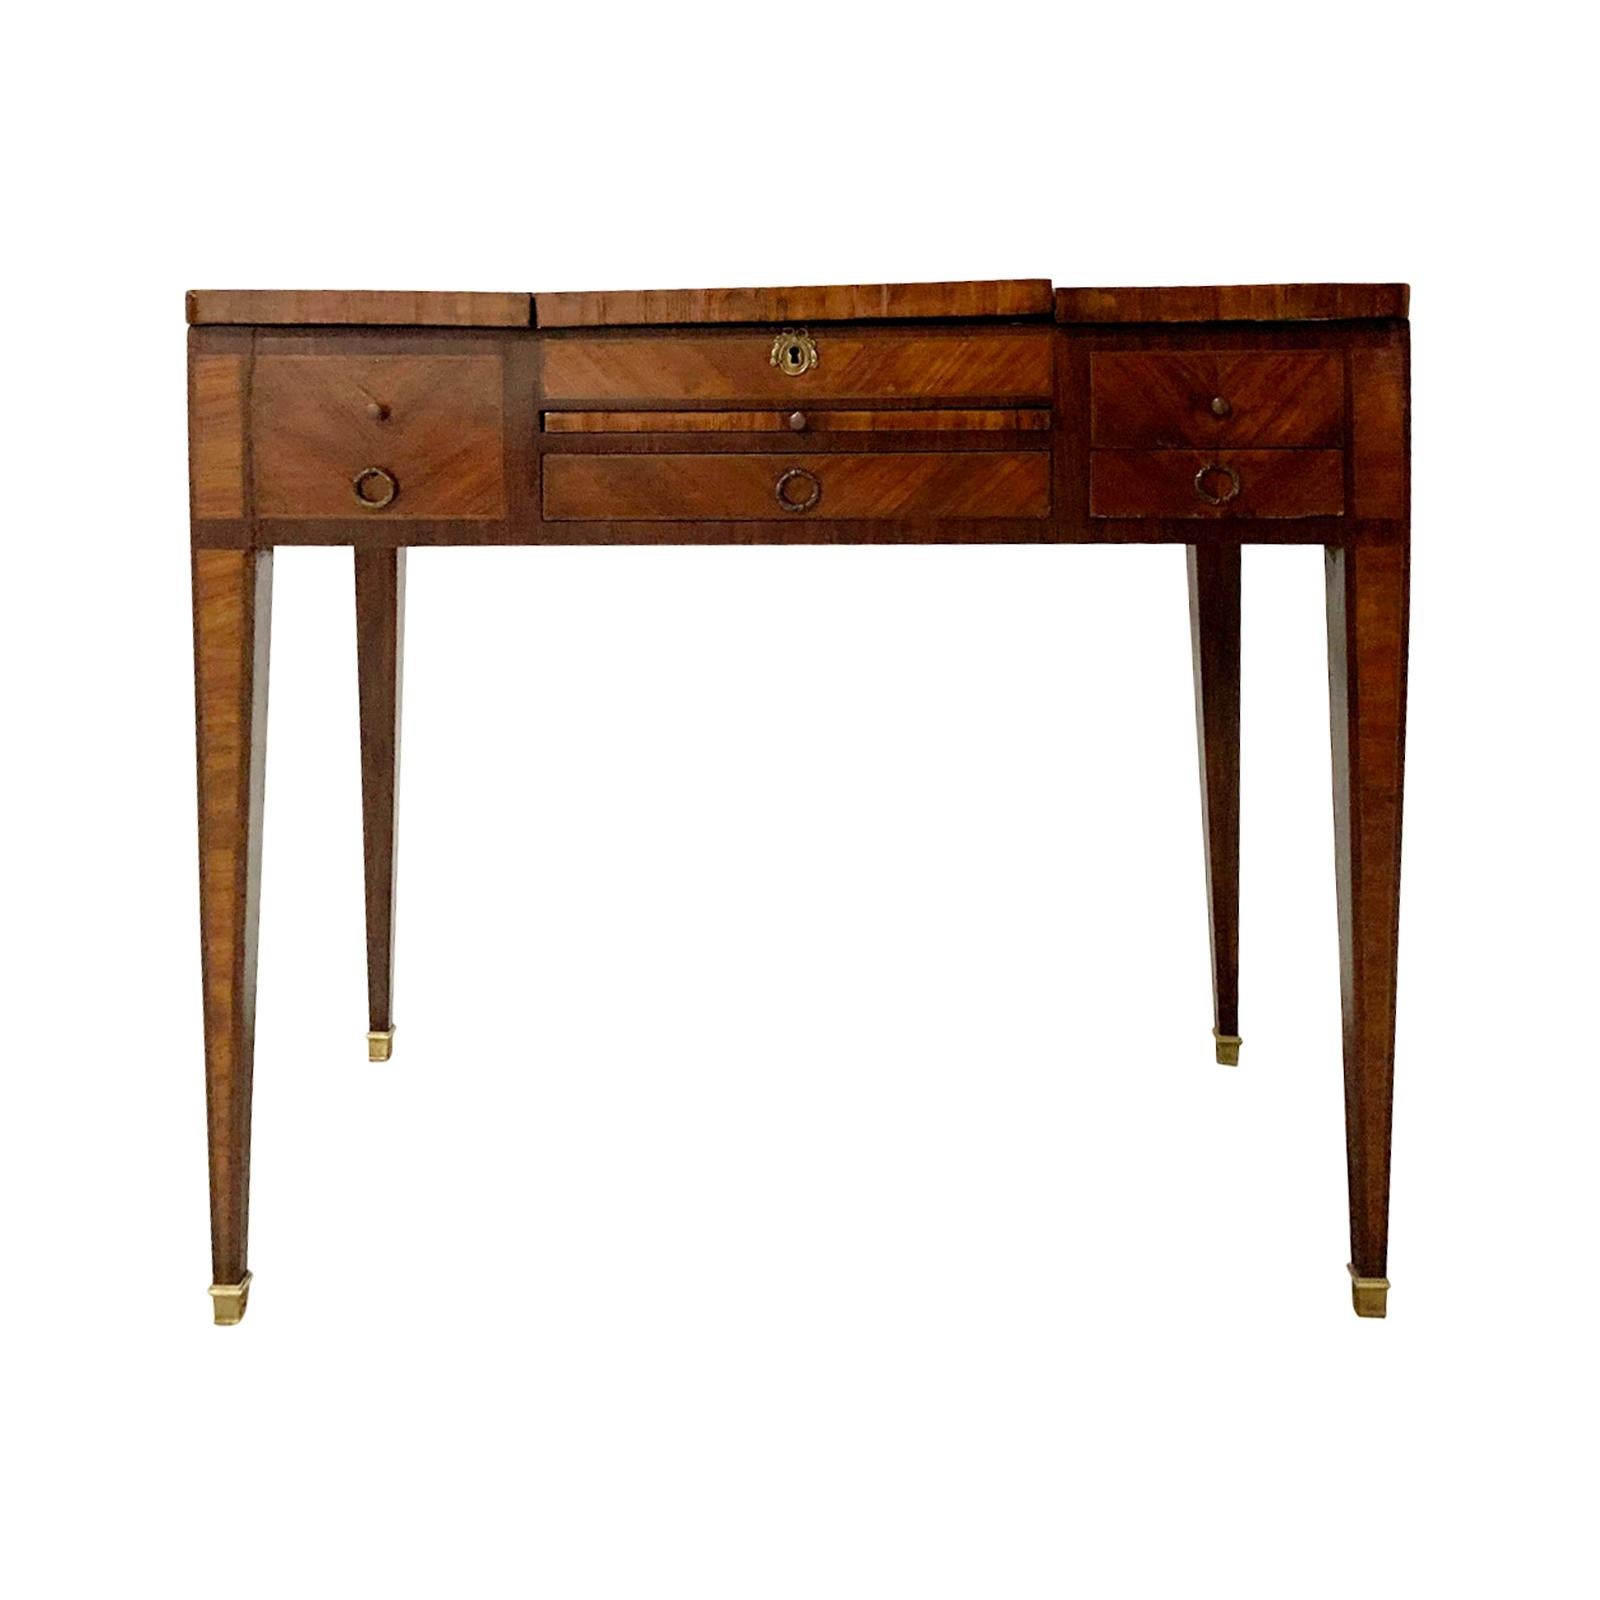 19th Century French Inlaid Poudress Dressing Table with Mirror